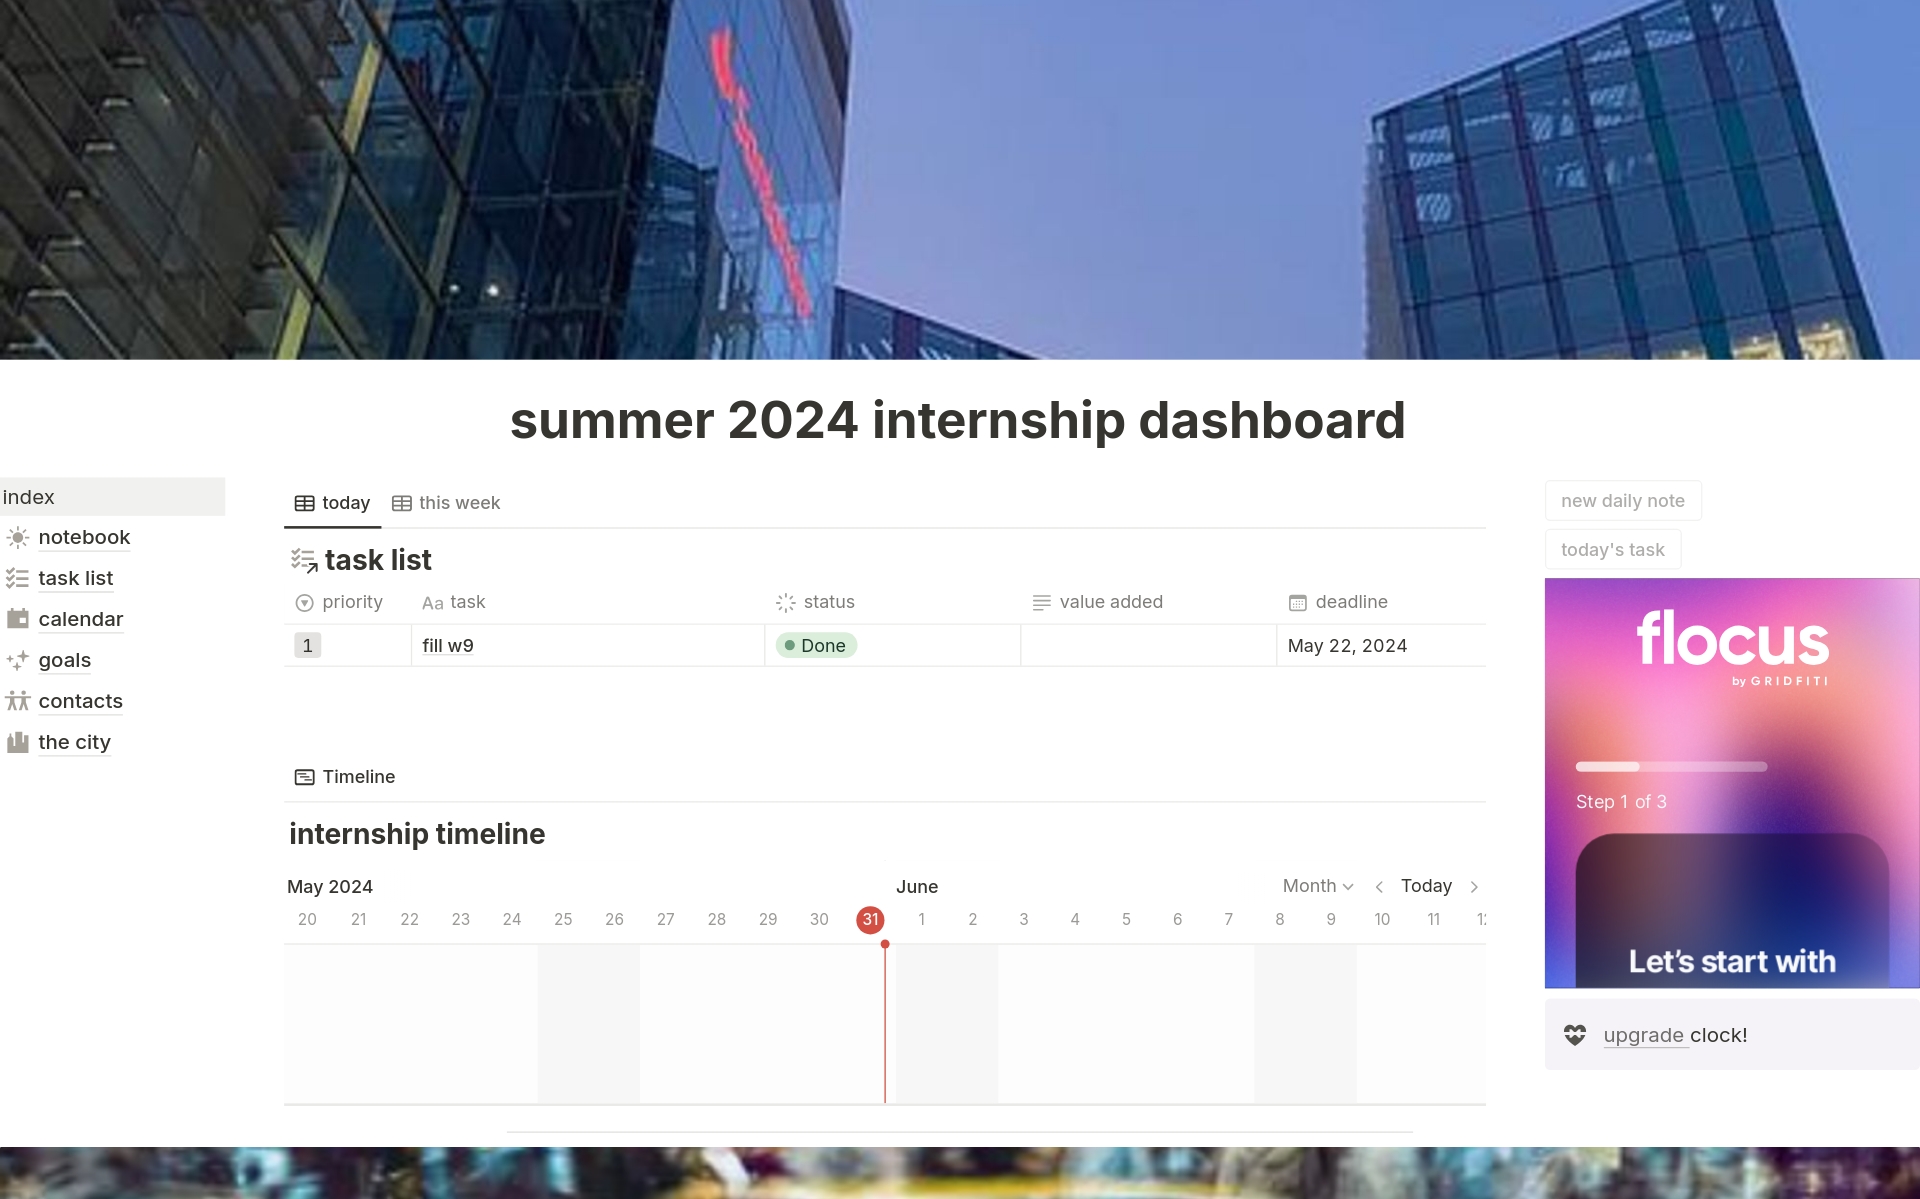 Your Internship Homebase is here! Track your projects and assignments, reflect on your daily work life, and track the value added to the company and your own growth!